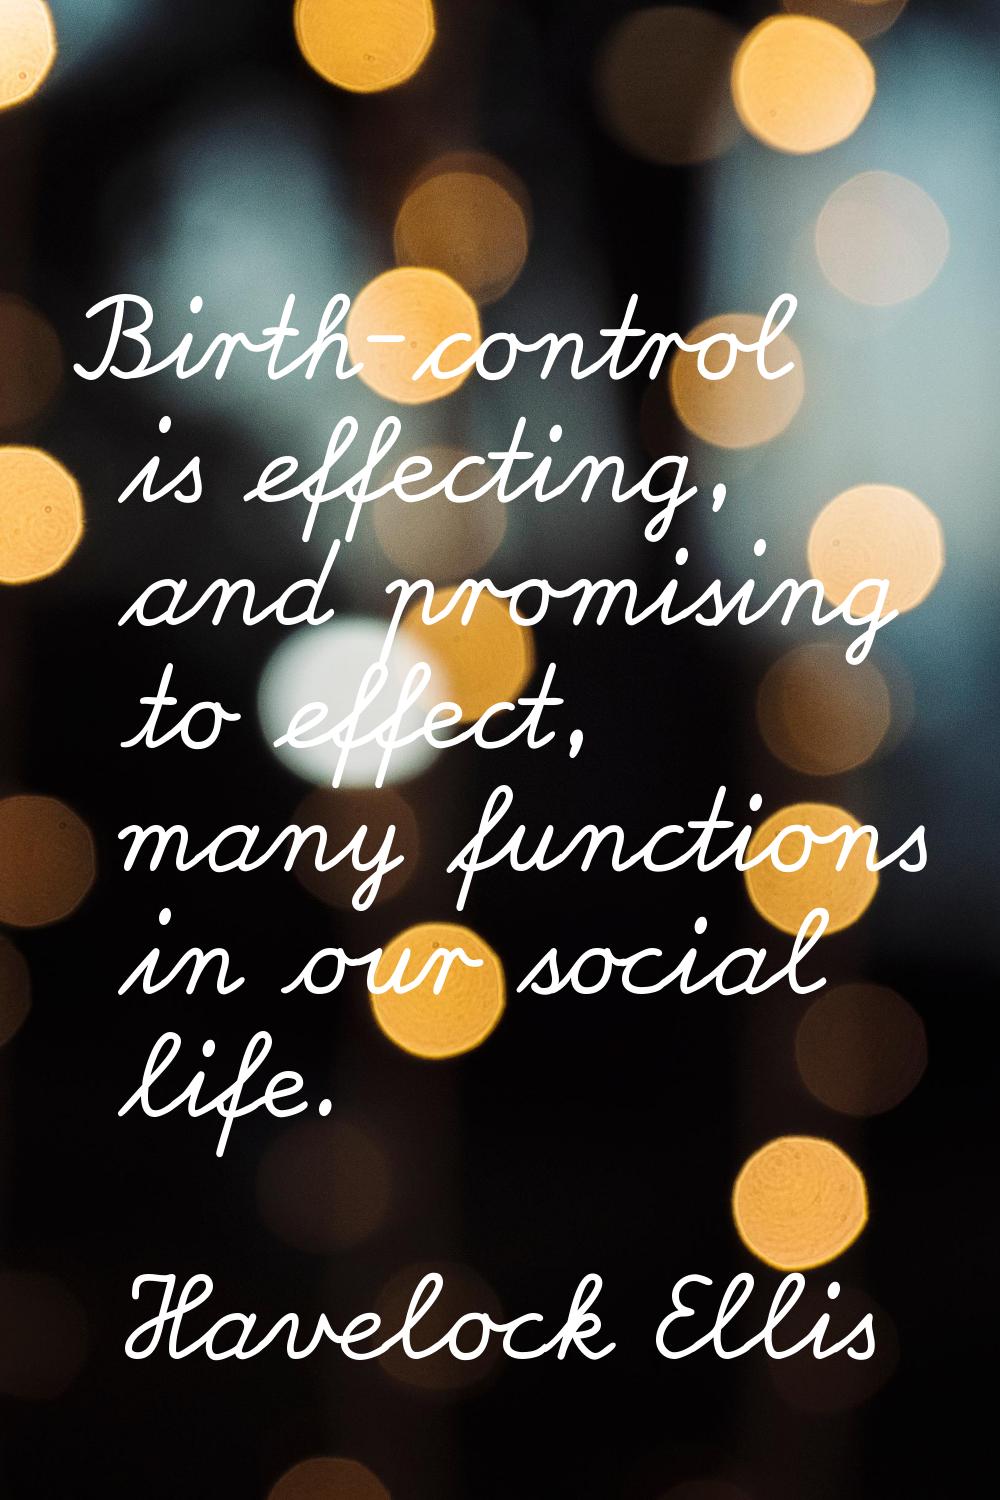 Birth-control is effecting, and promising to effect, many functions in our social life.